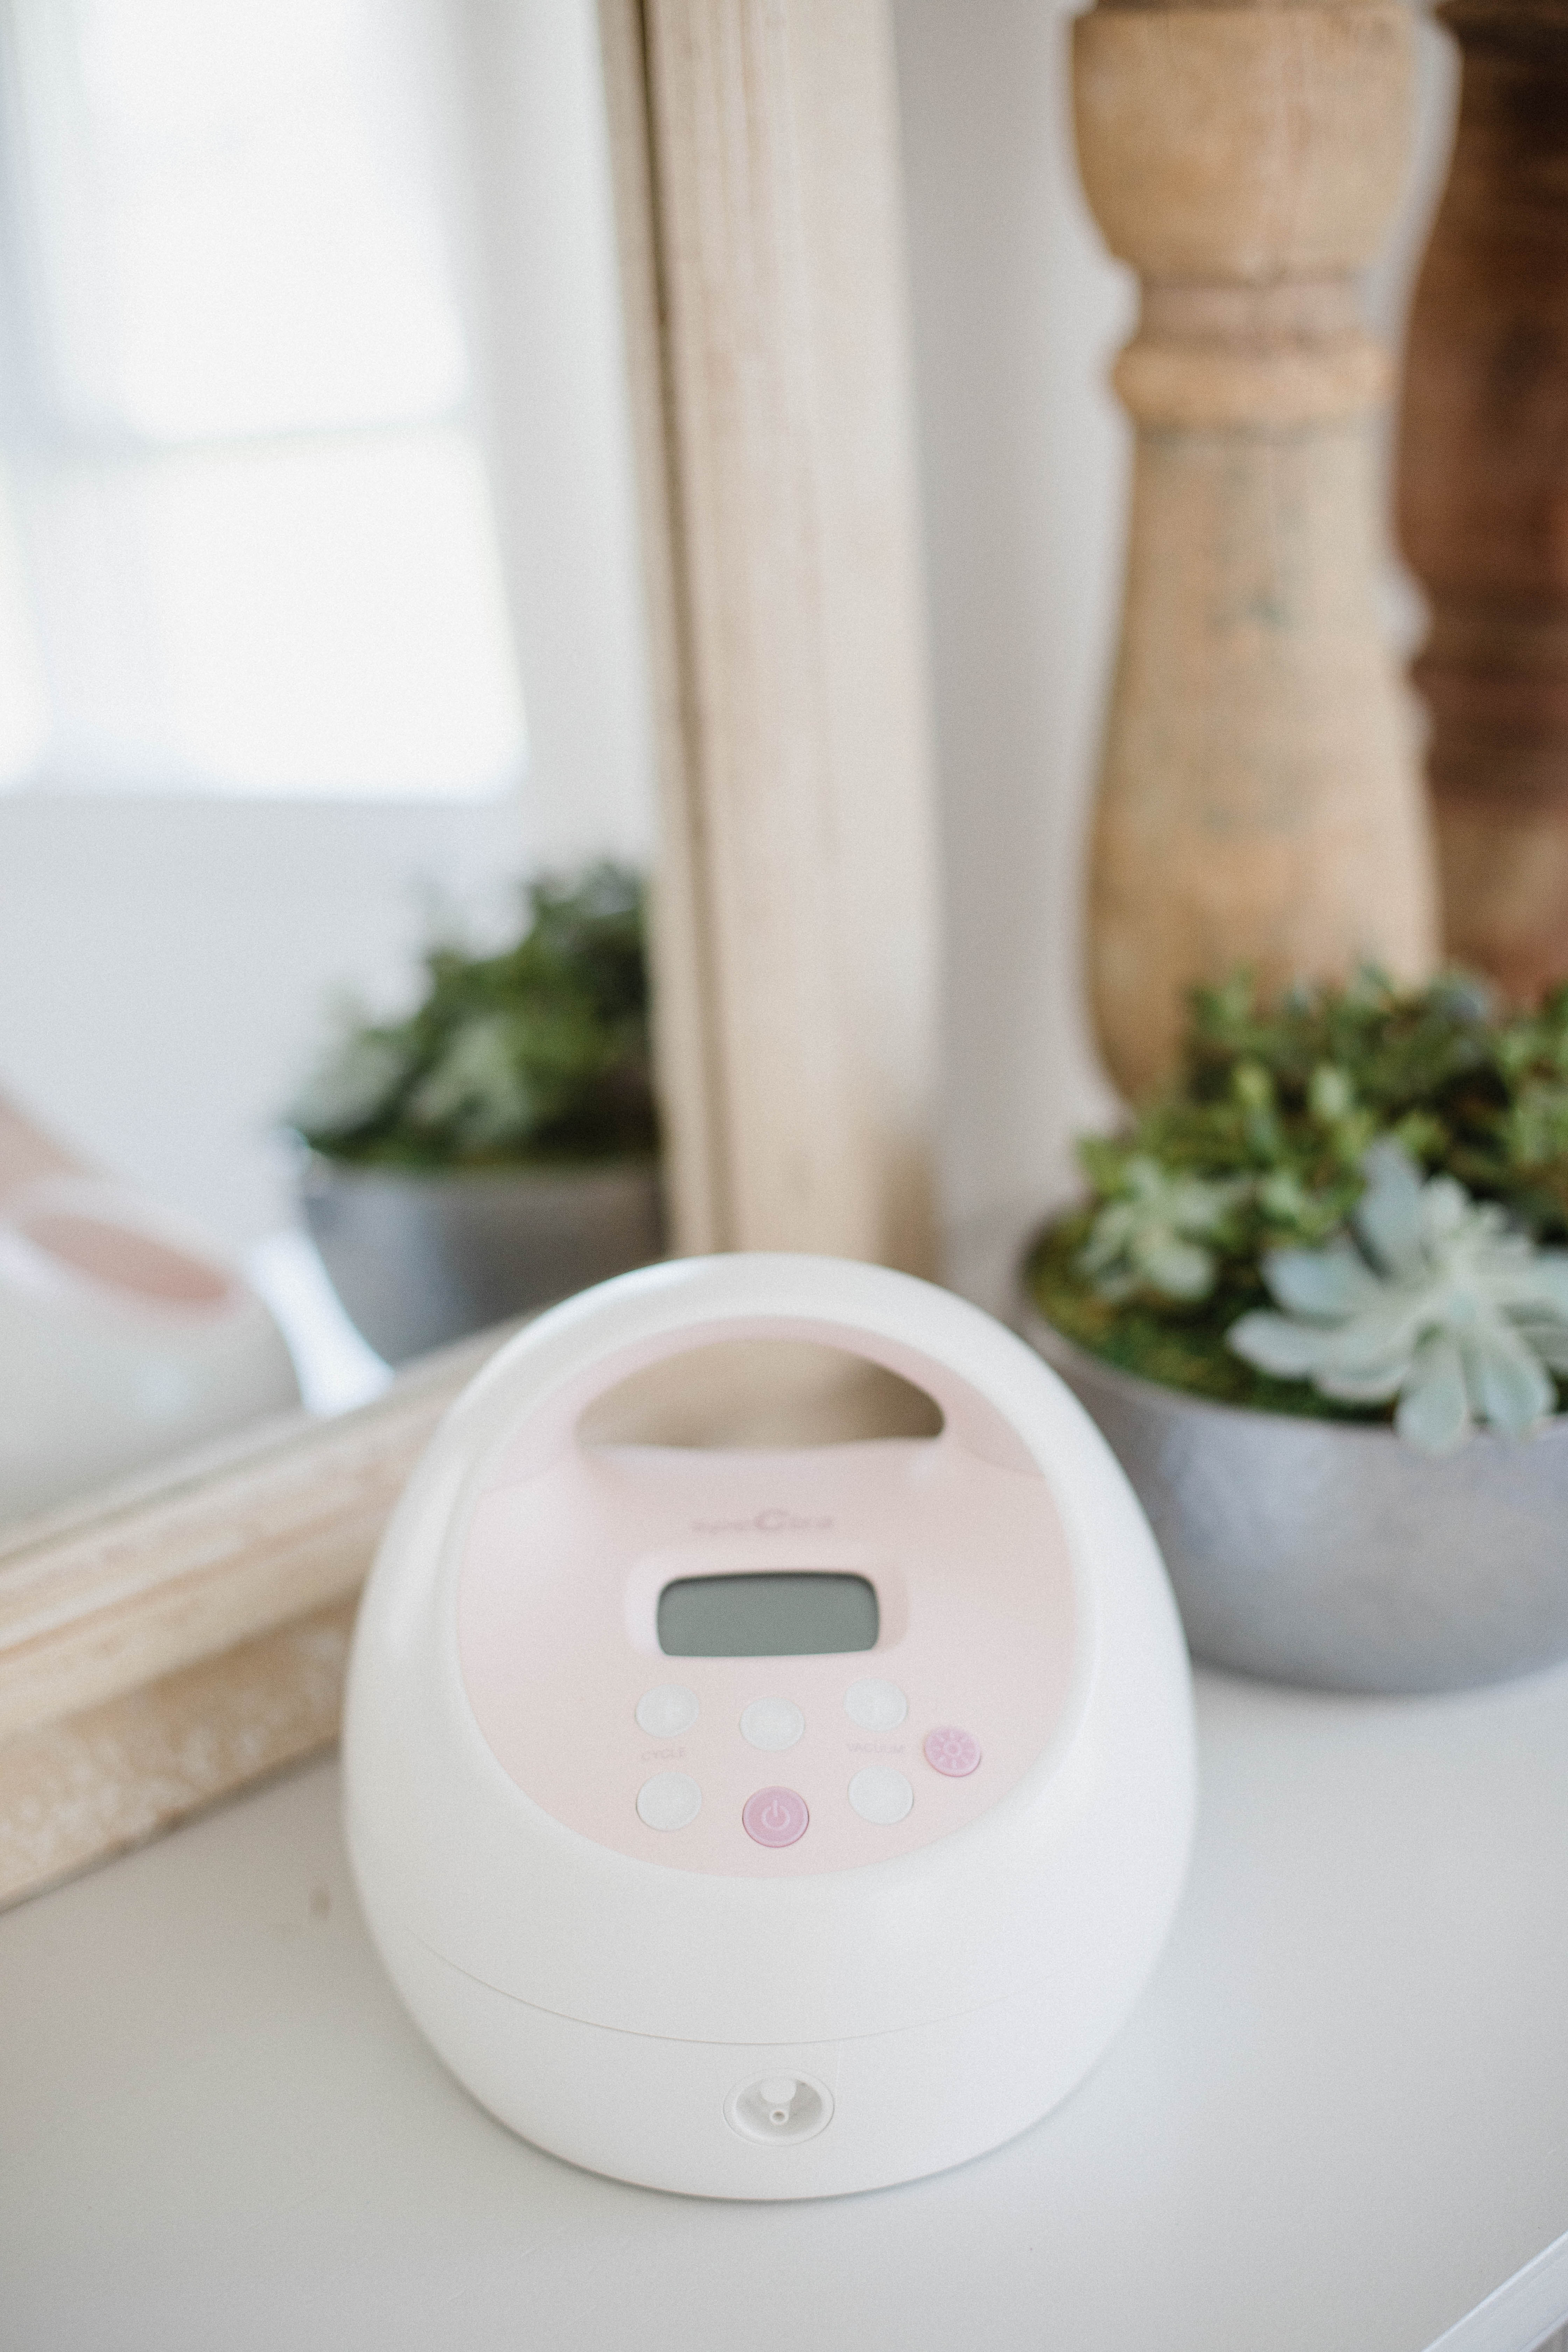 Life and style blogger Lauren McBride shares a Medela Pump in Style Advanced and Spectra S2 Comparison that explains the pros and cons of both breast pumps.